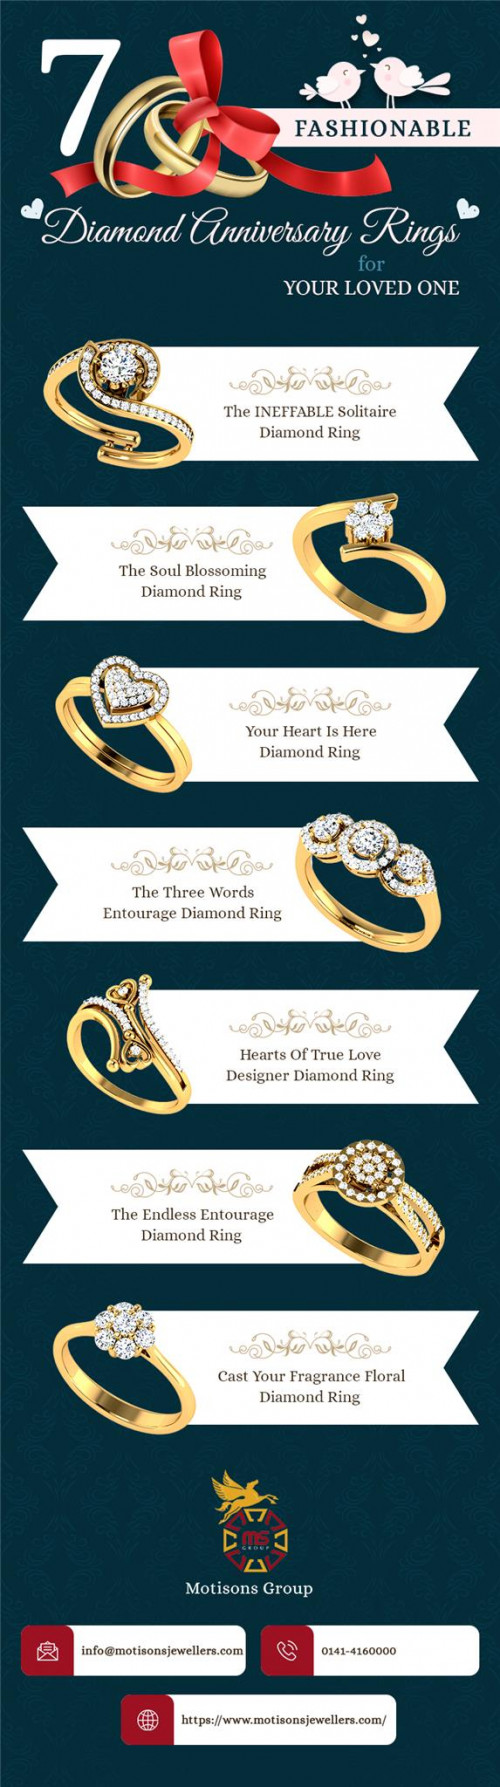 Diamond Rings are an ever-green fashion accessory that will always be in style. Not only you can wear them to accessorize an outfit, but you can pull it off on a daily basis too. Buy Diamond Anniversary Rings Online at Motisons Jewellers, your one-stop destination to shop for exclusive diamond jewellery.  Check Out @ https://www.motisonsjewellers.com/jewelry/ring